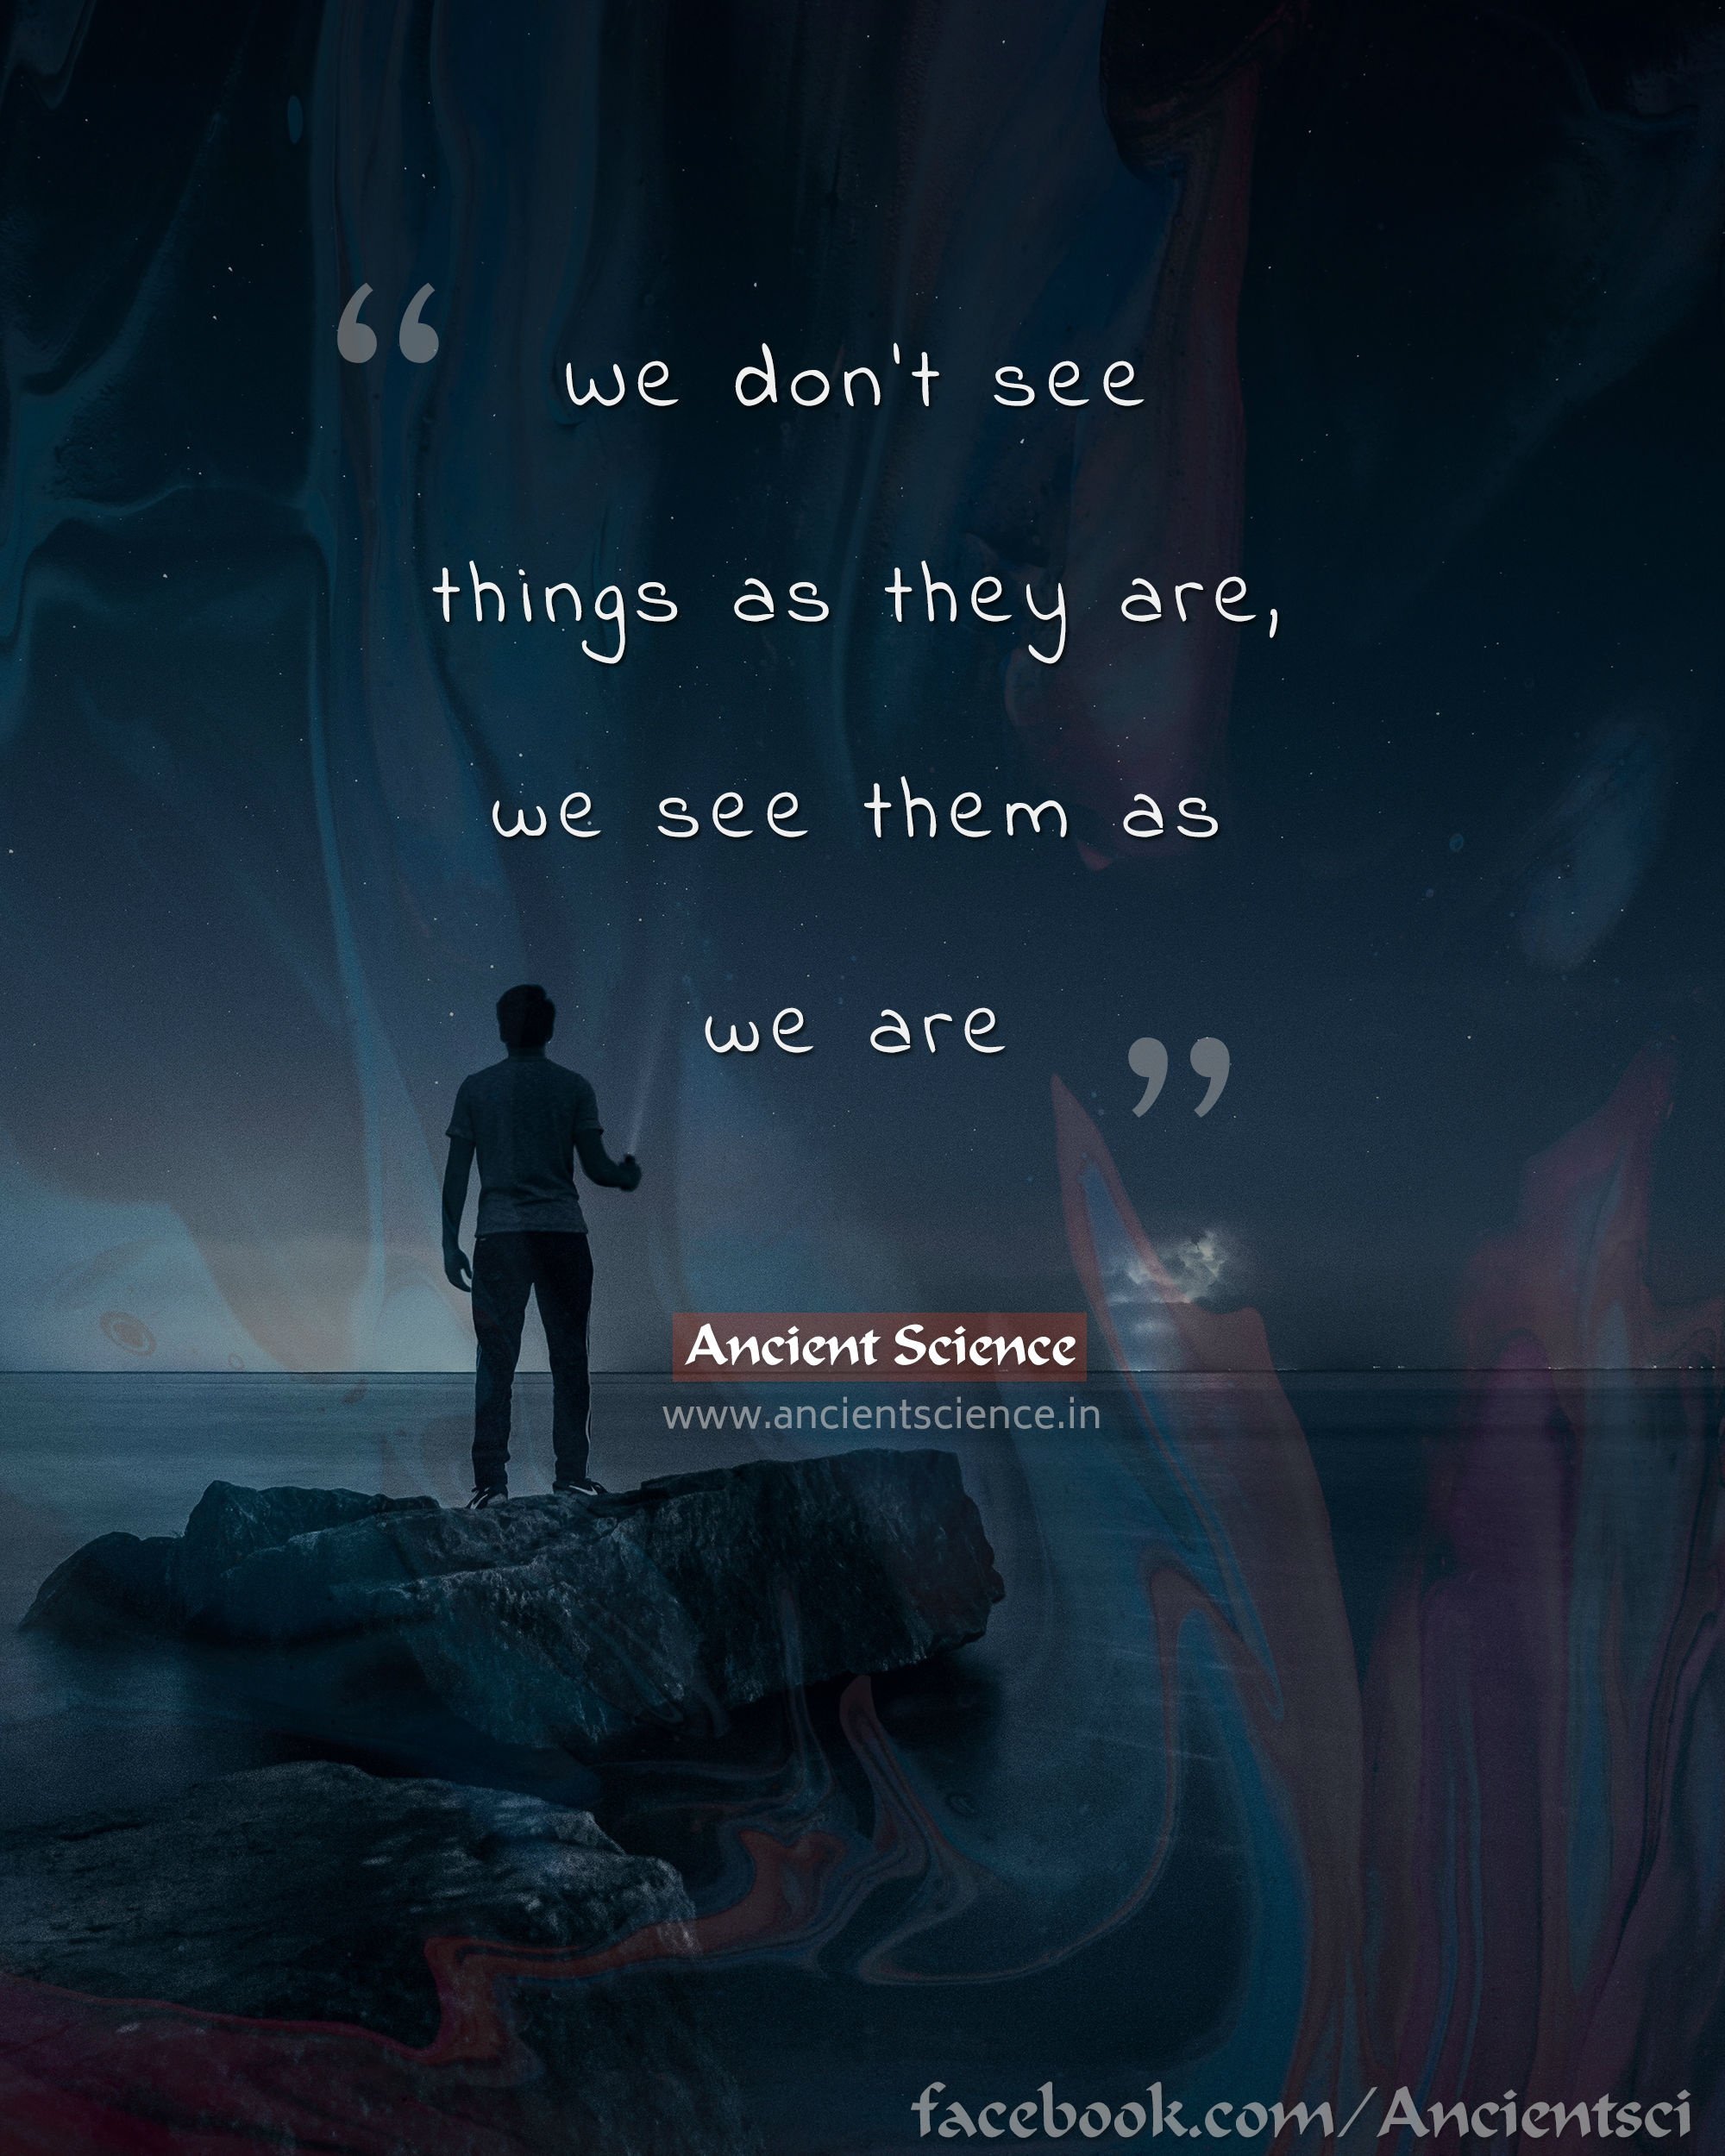 We don't see things as they are, we see them as we are